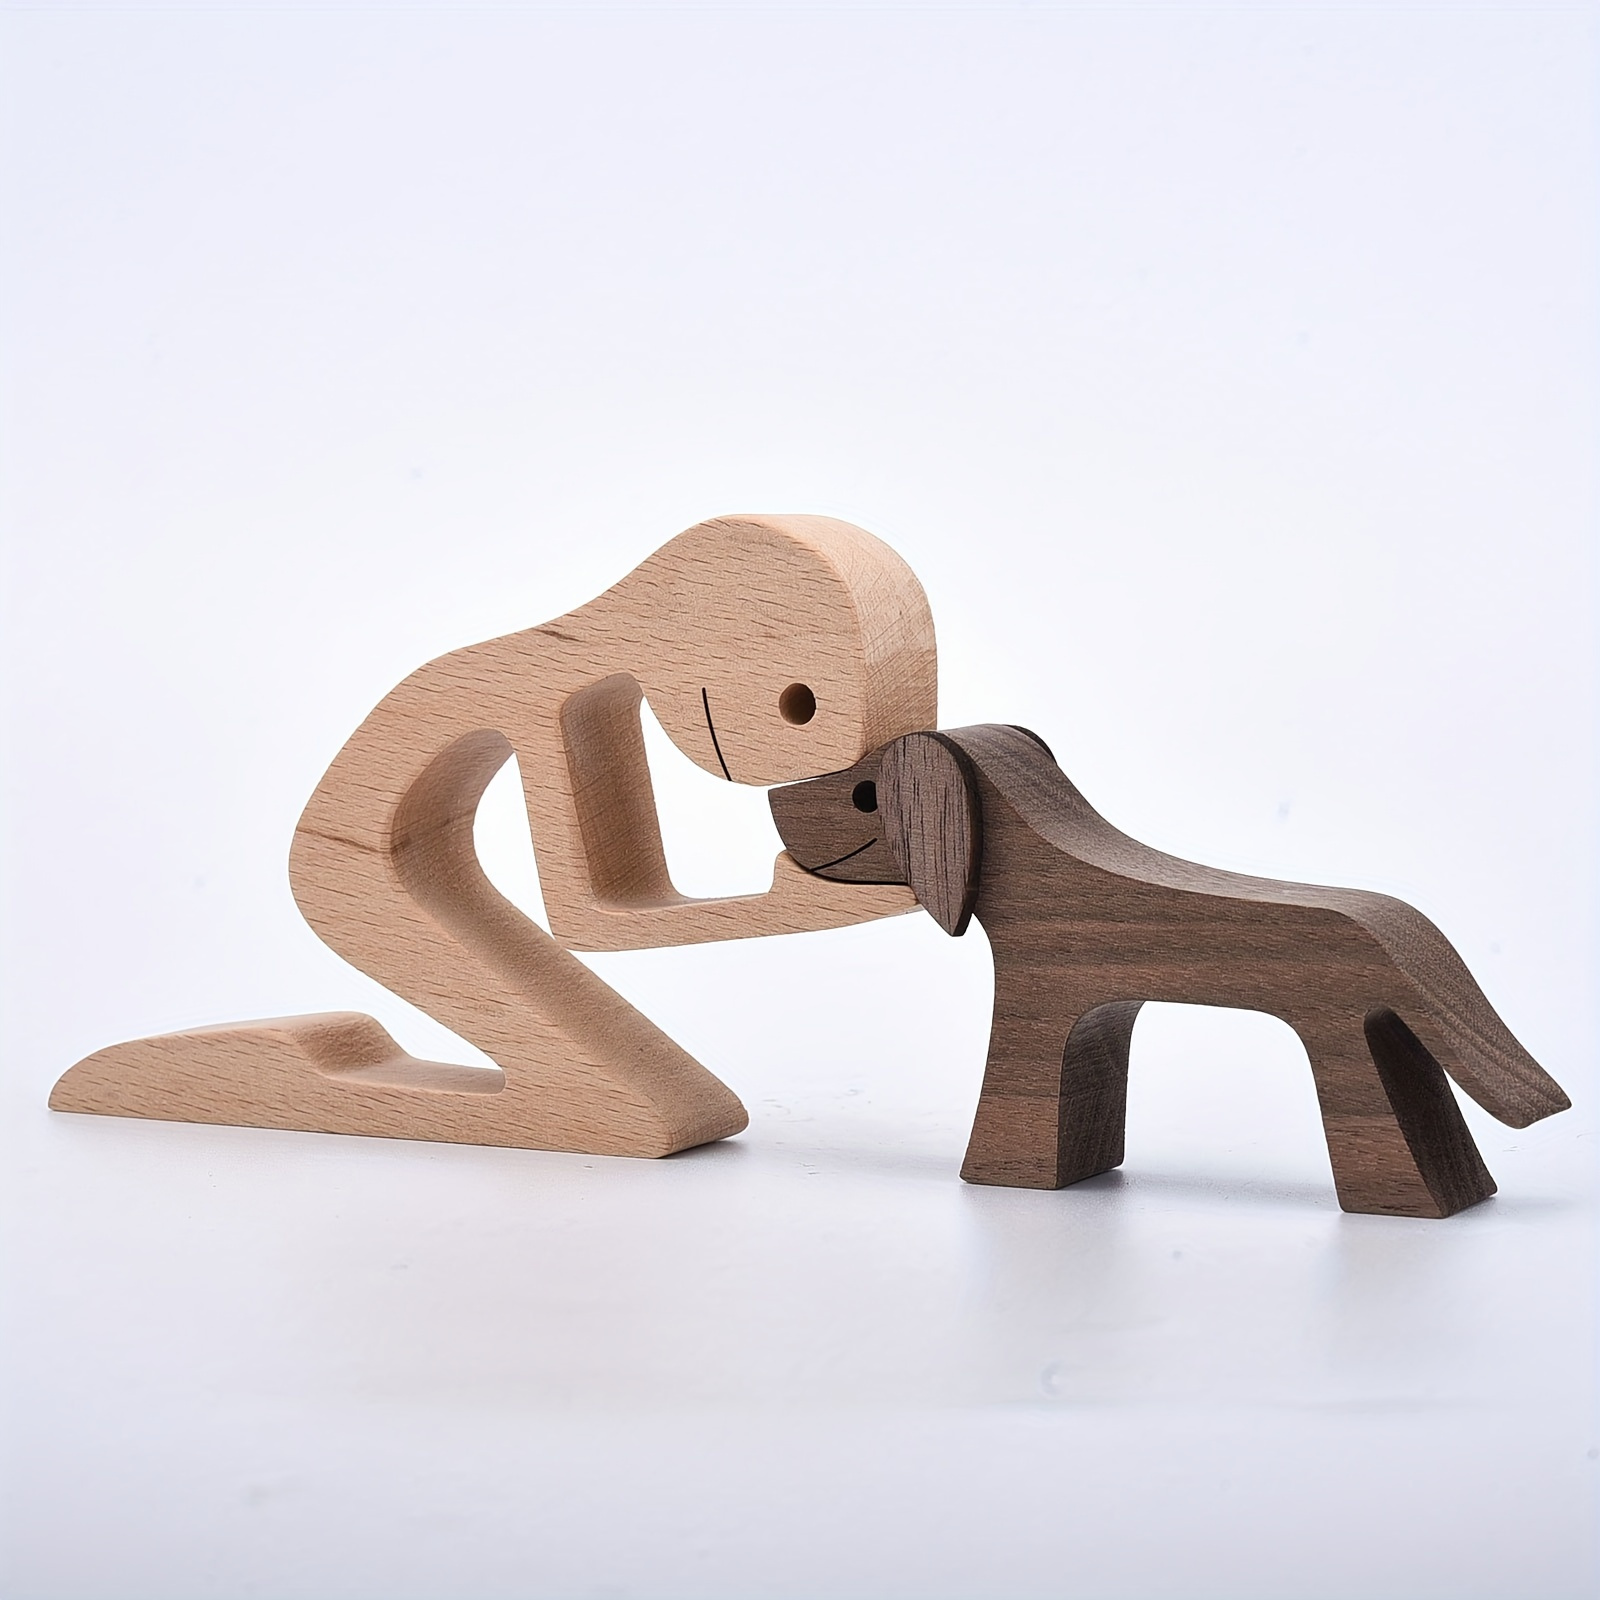 

1pc, Handmade Wooden Statue Of Man And Dog - Show Your Love For Your Pet With Natural Solid Wood Cute Puppy - Perfect Home Decor And Gift For Animal Lovers